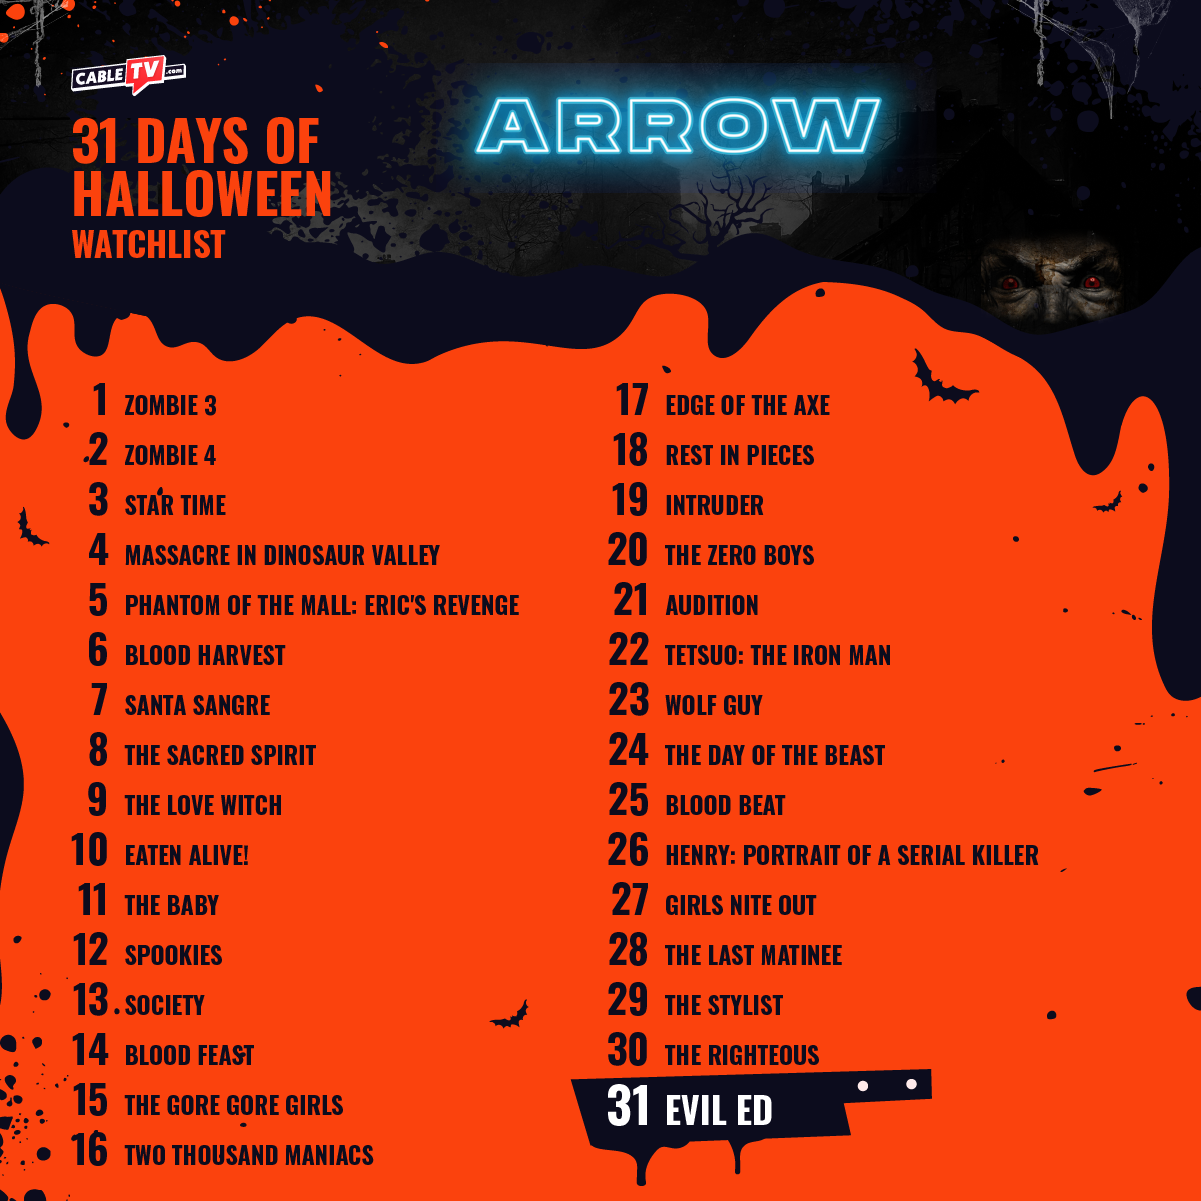 List of 31 horror movies to watch in October on Arrow